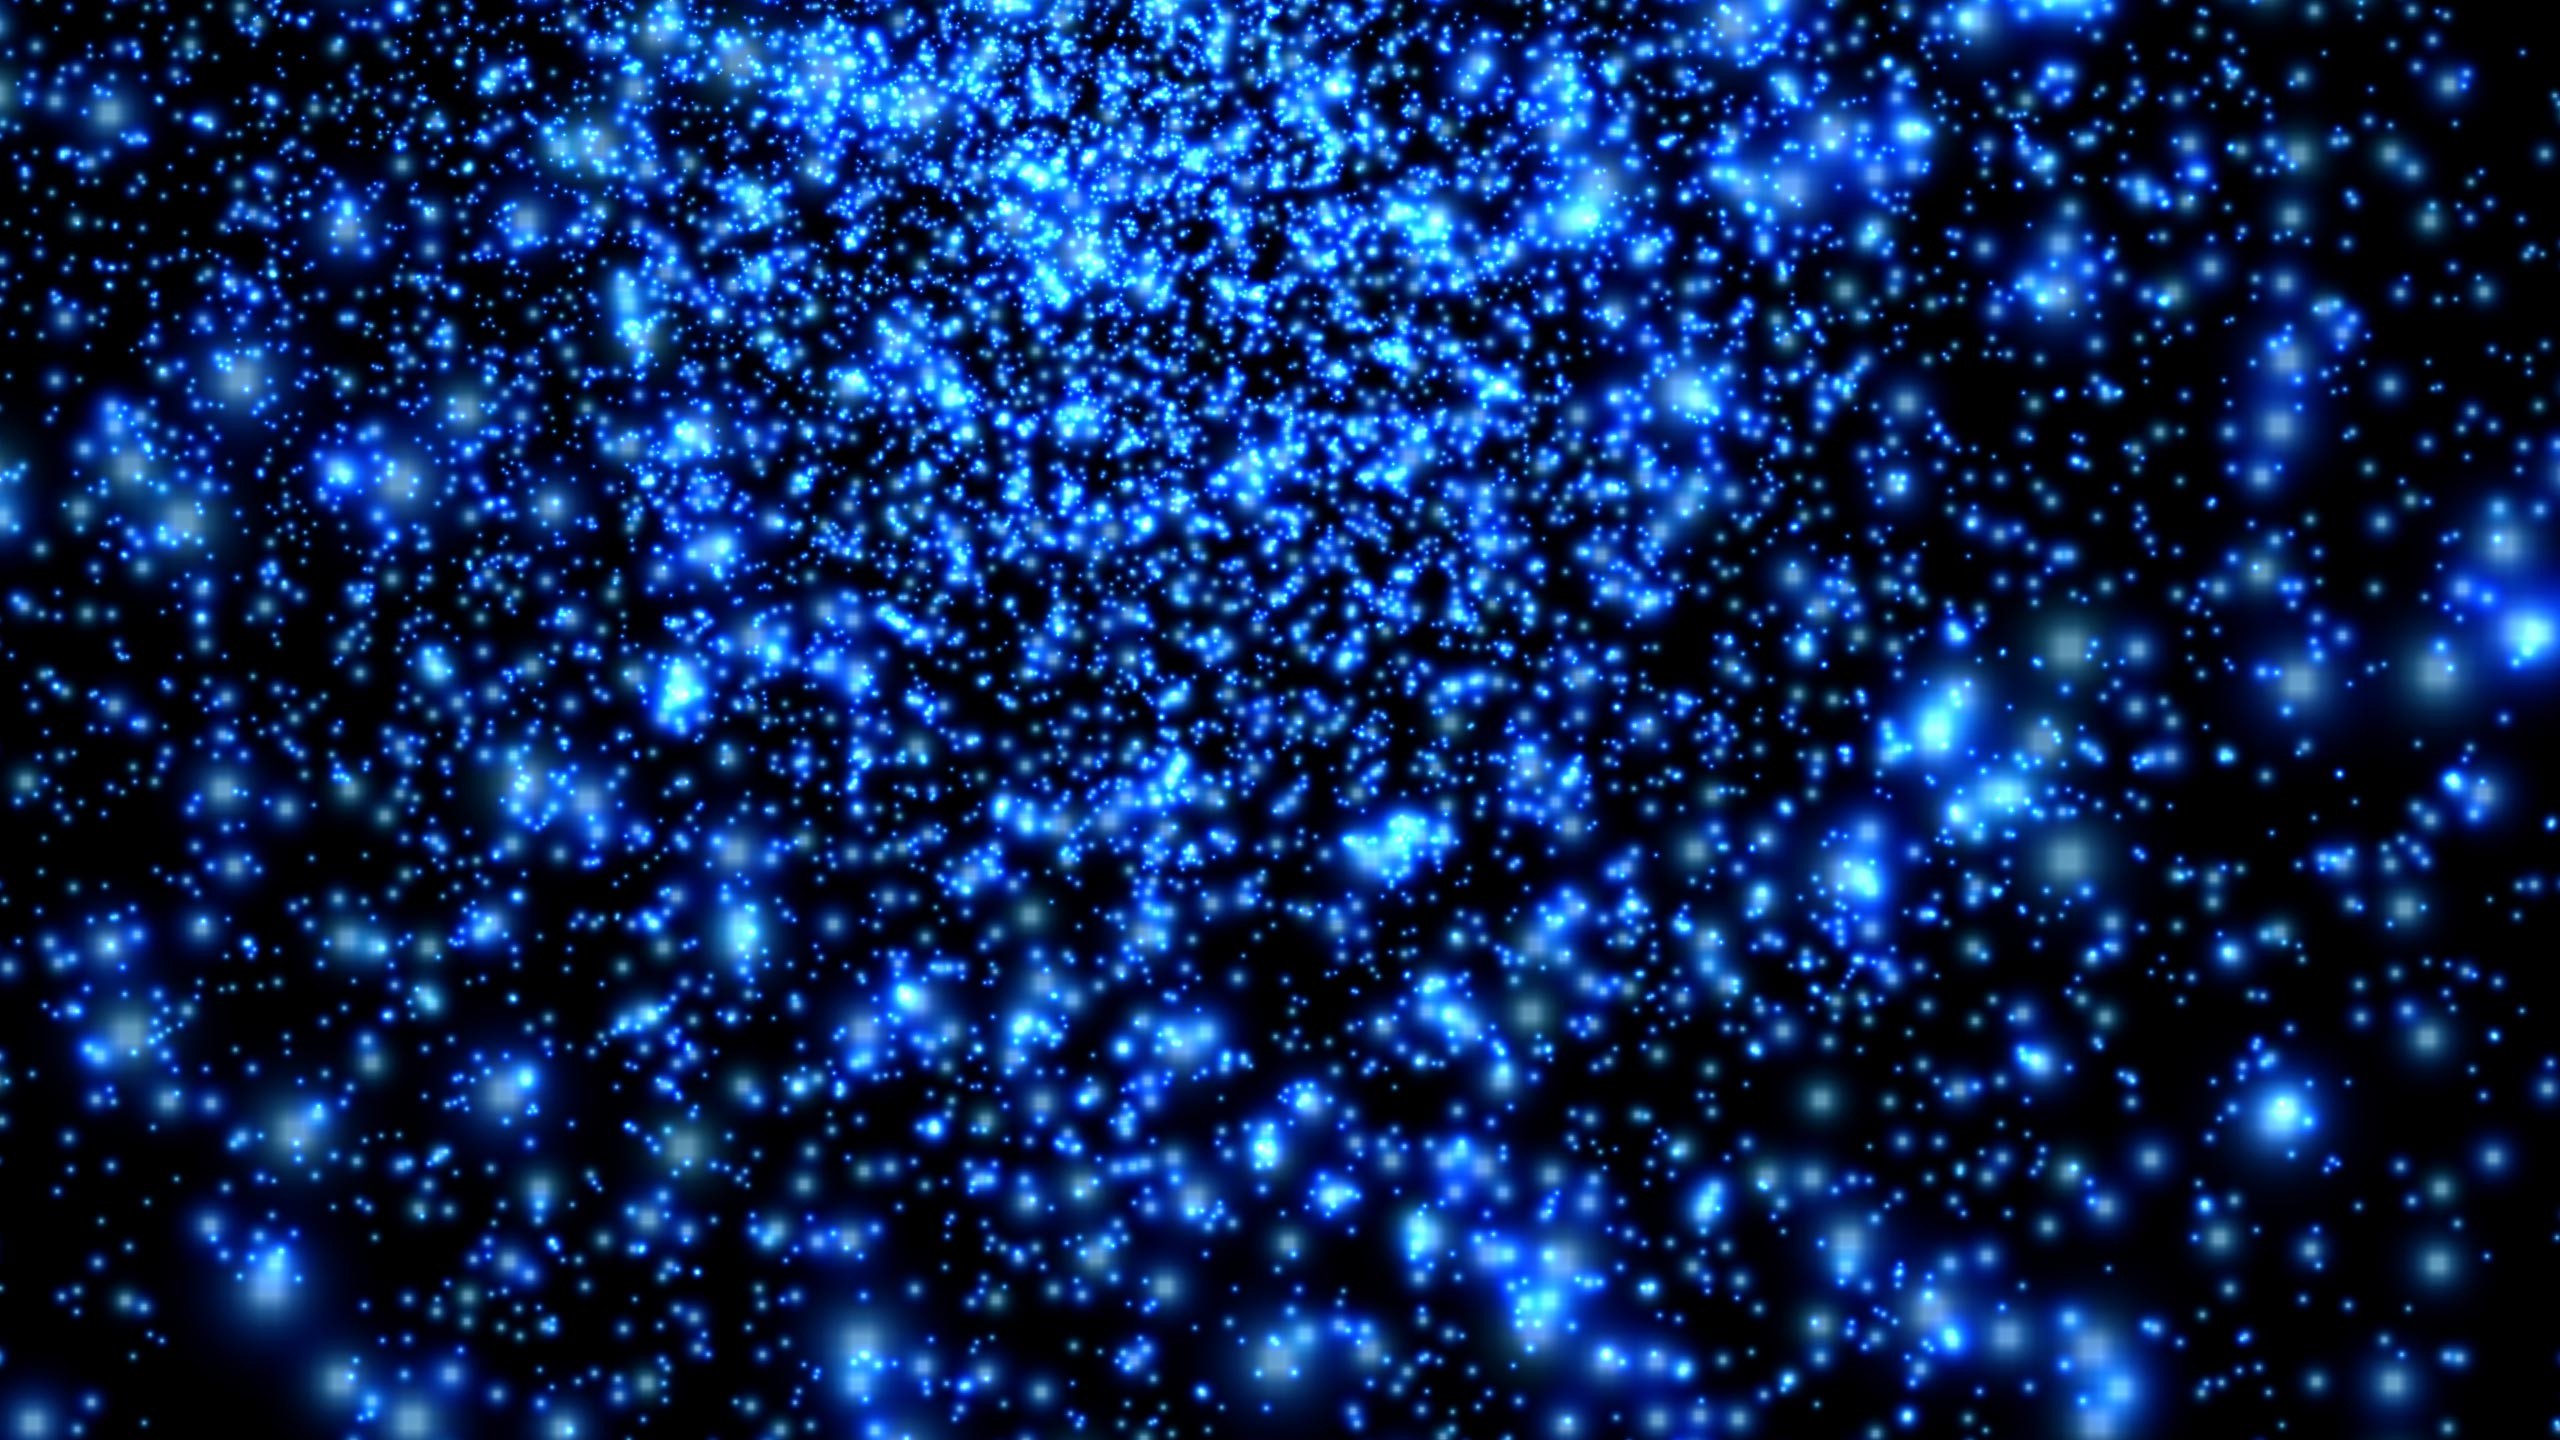 Space Dust 3D free live wallpaper will fascinate you with the fabulous flying through a space dust